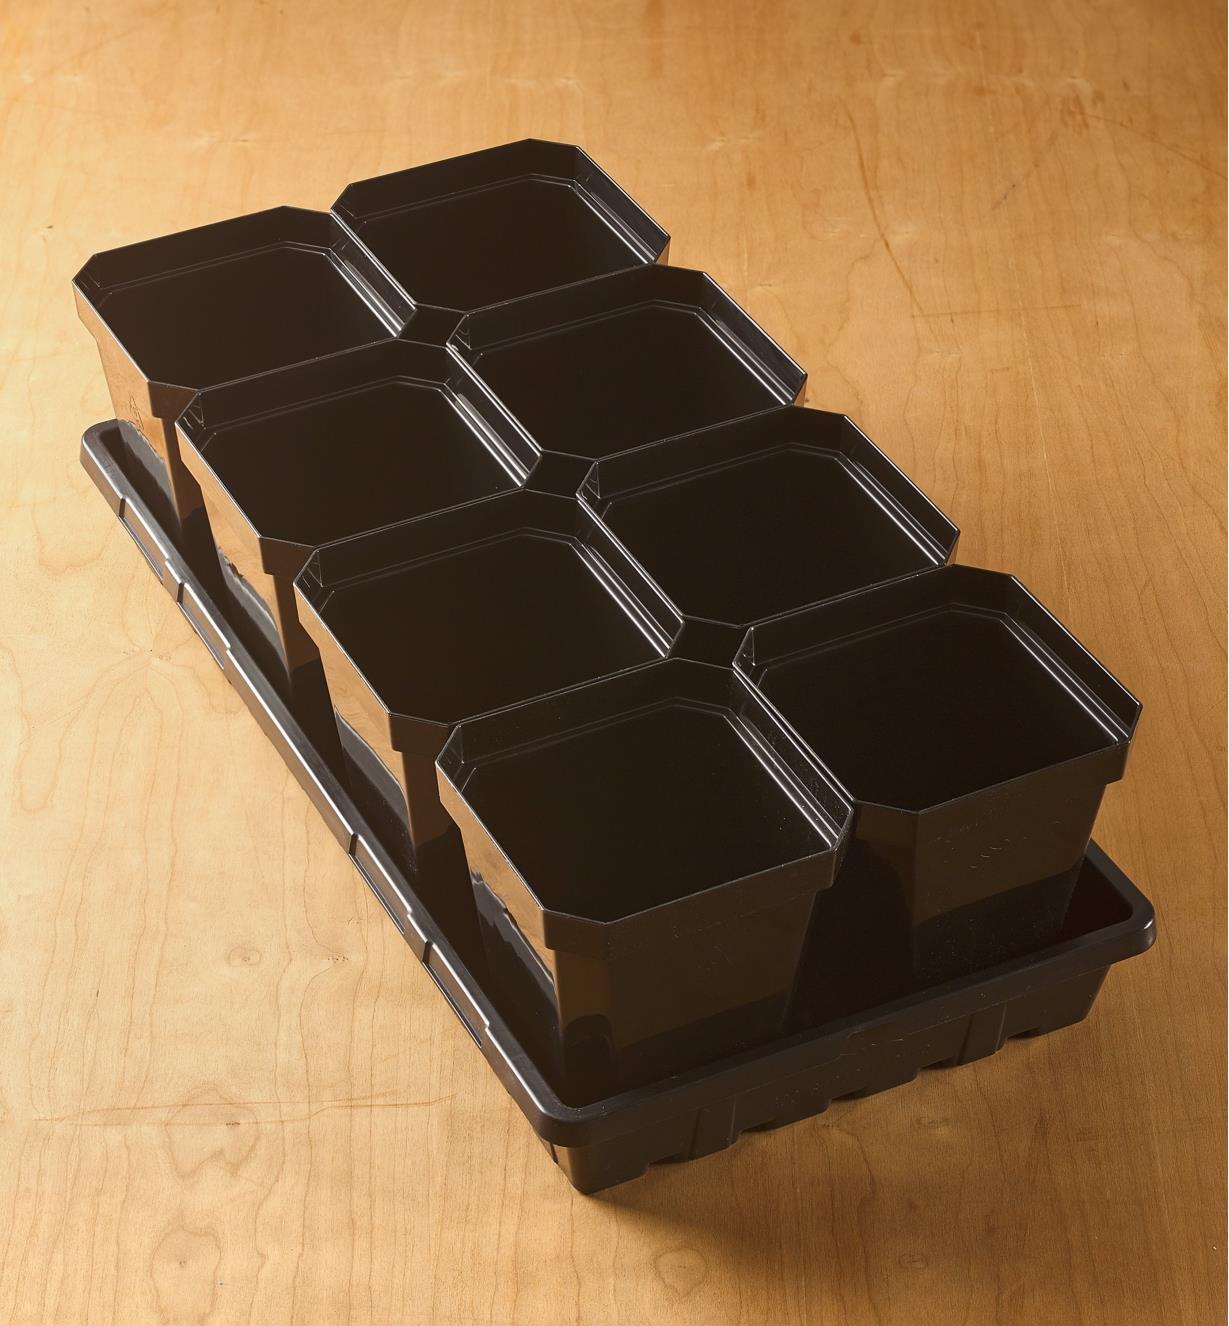 AA683 - 8-Pack of 5"" Black Pots with Propagation Tray